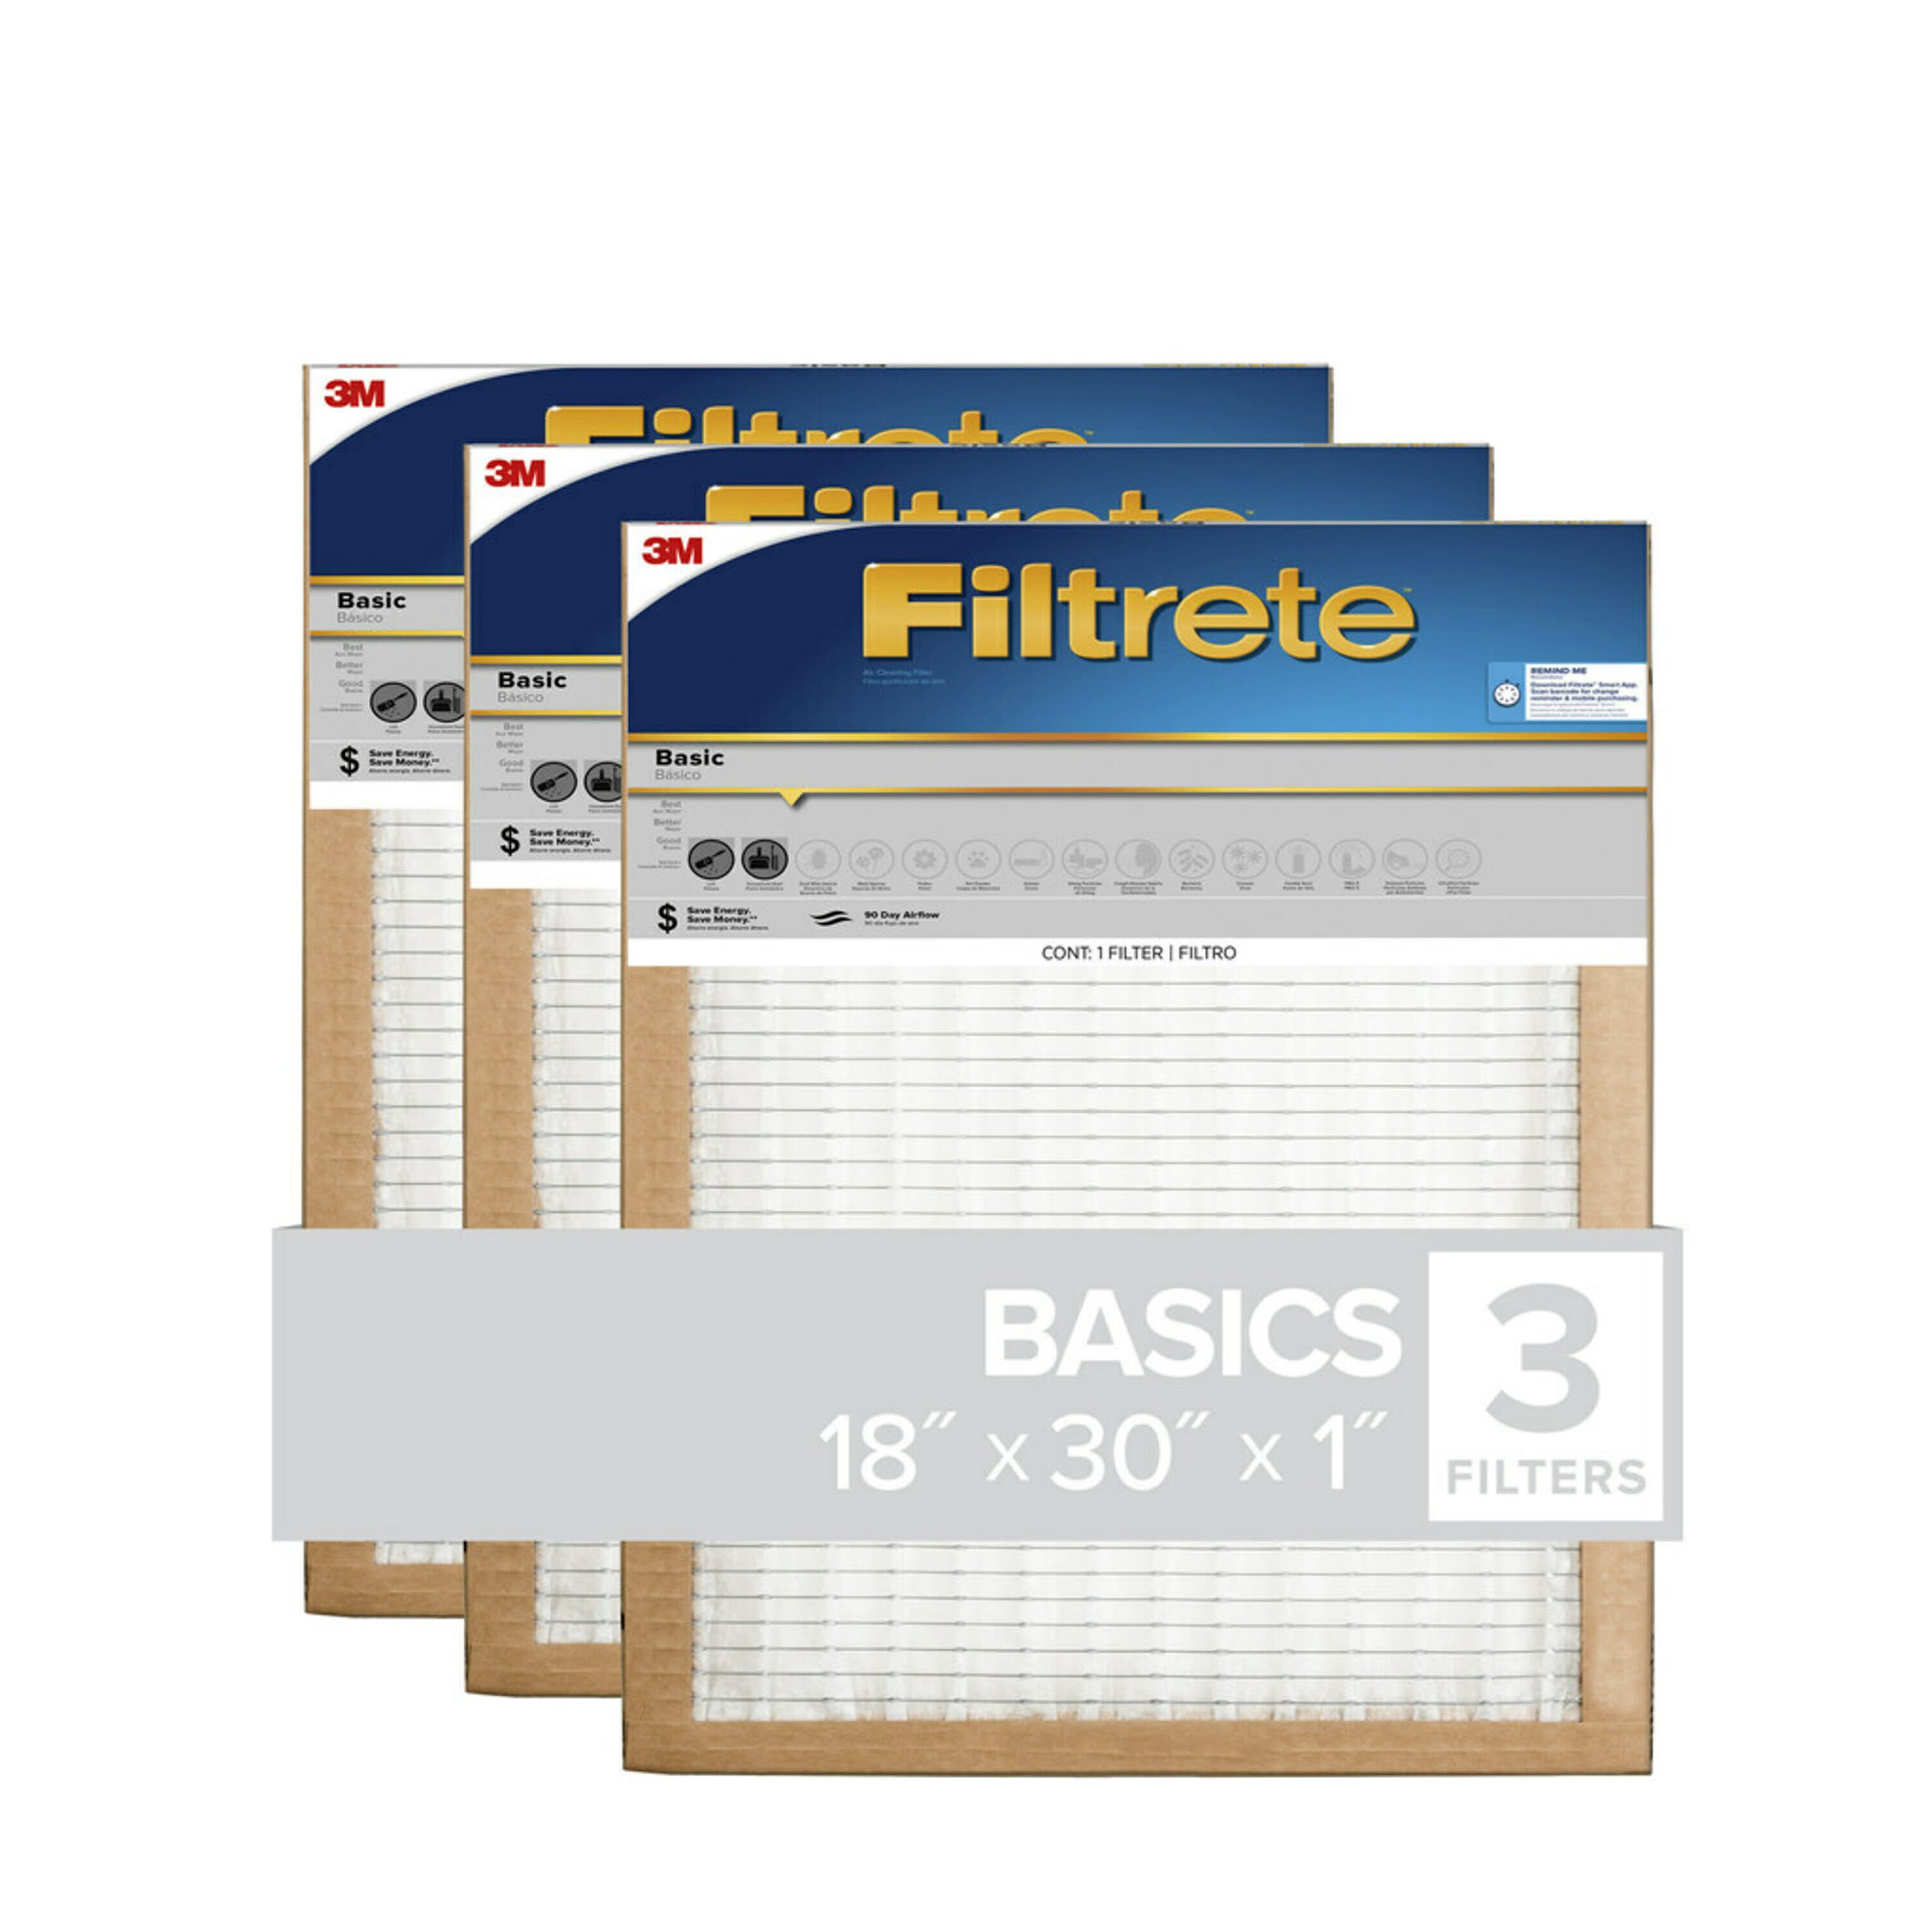 6-Pk 18 x 30 x 1 Filtrete-Basic 3M Air-Filter Replacement Pad Furnace Dust Lot 